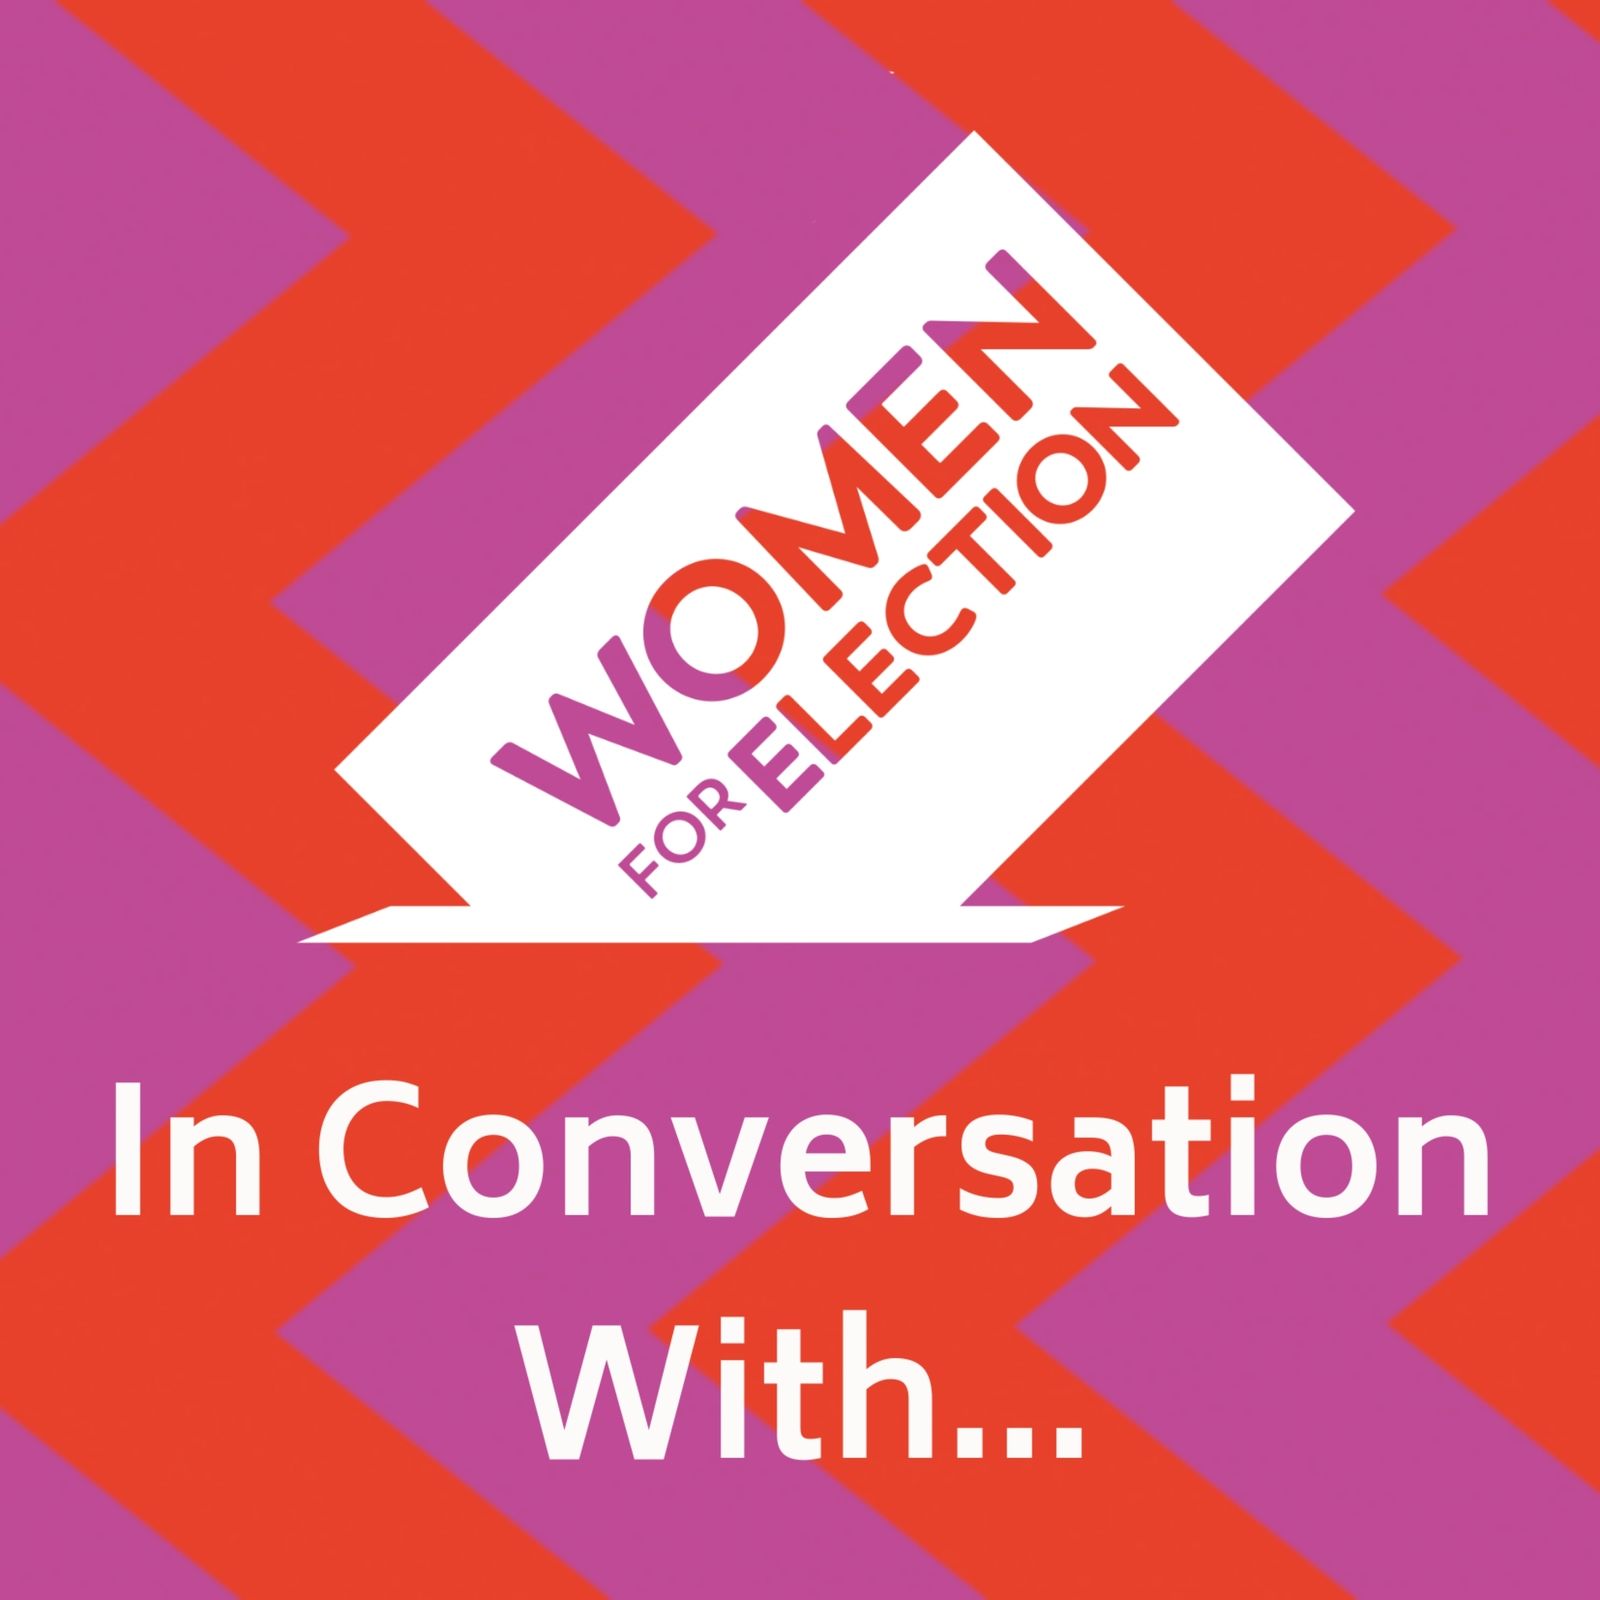 Women For Election - In Conversation With